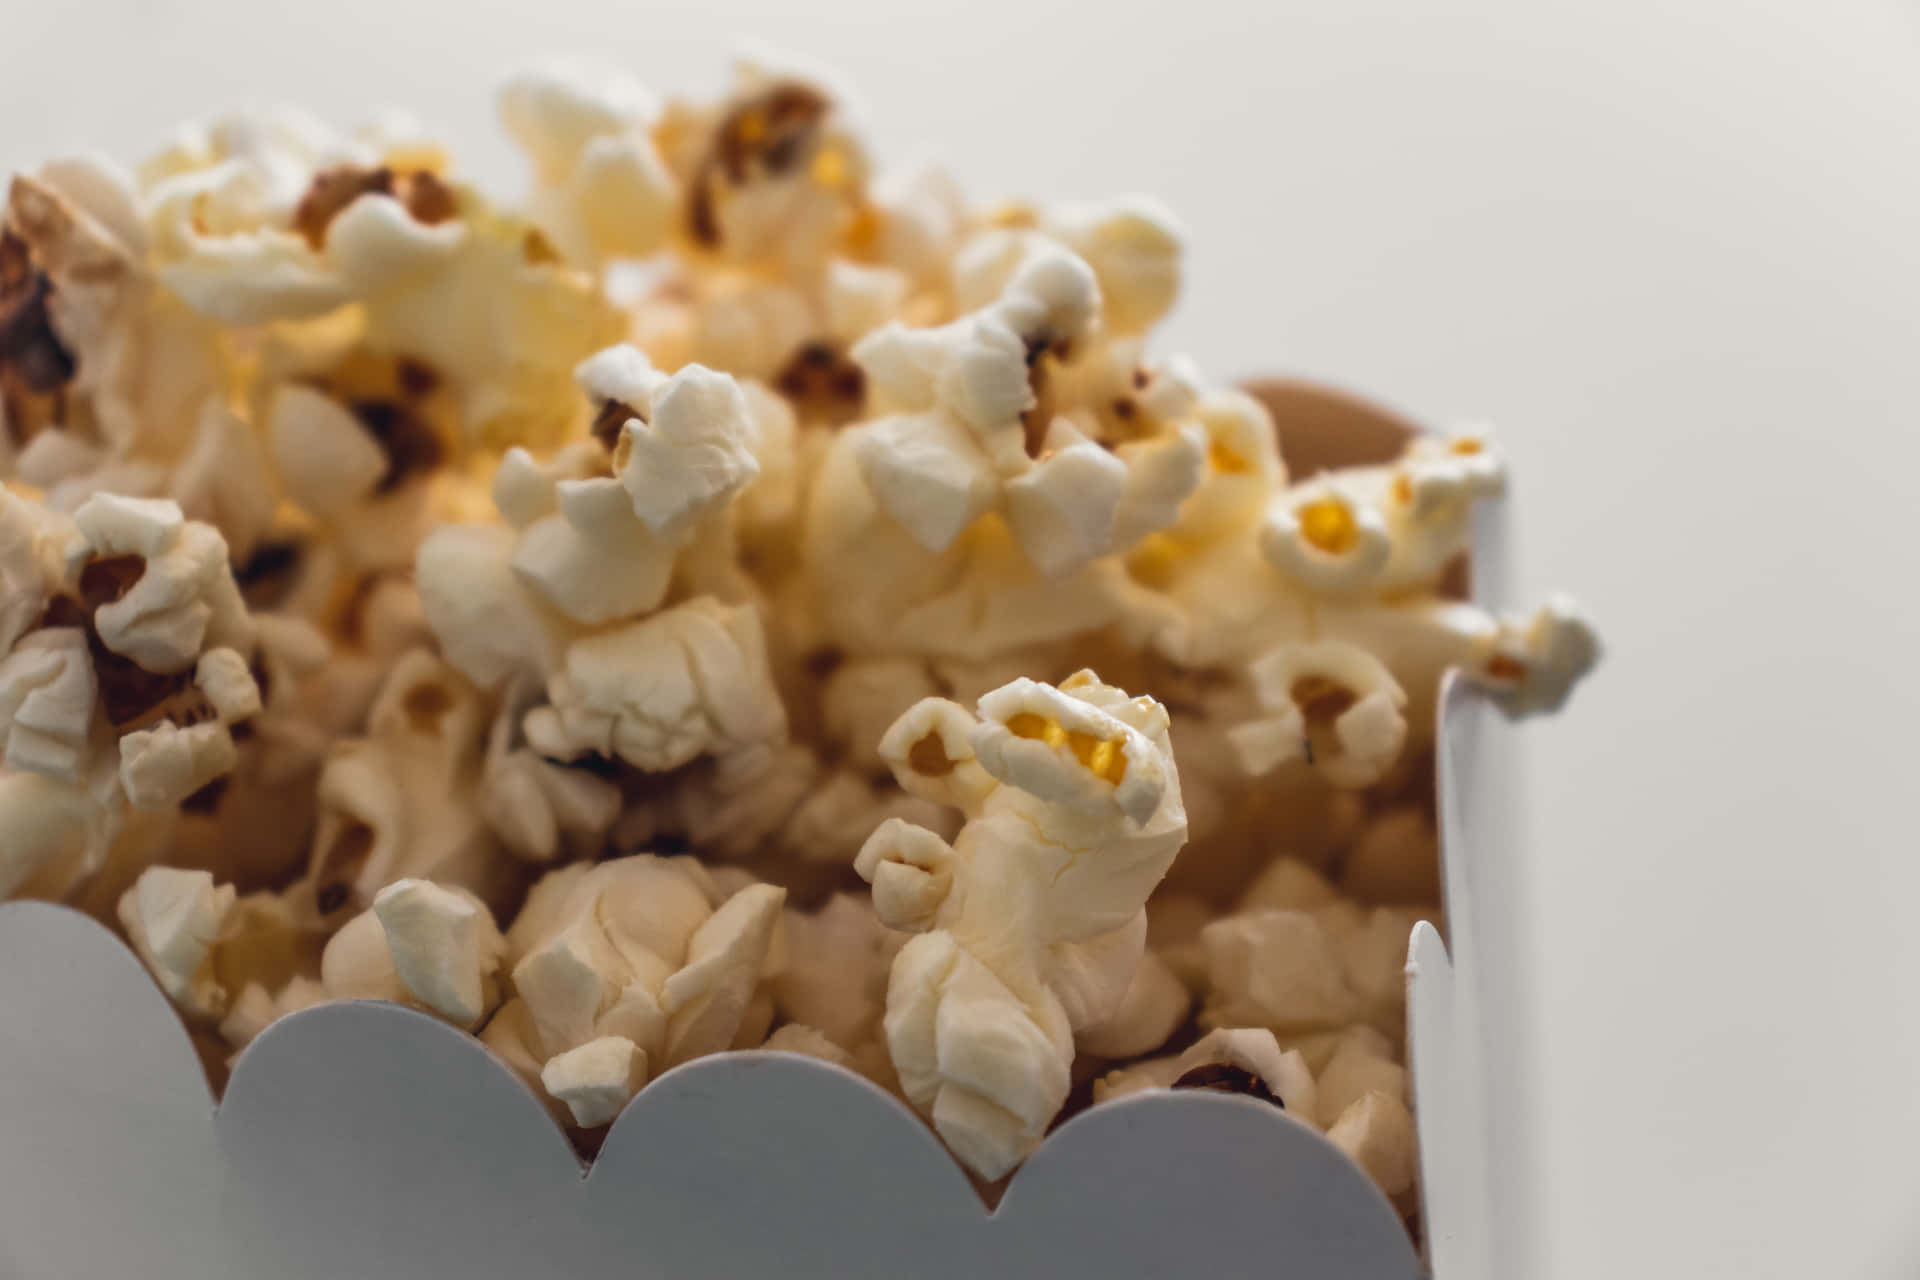 A classic movie night snack, there's nothing like snacking on some freshly-popped popcorn!